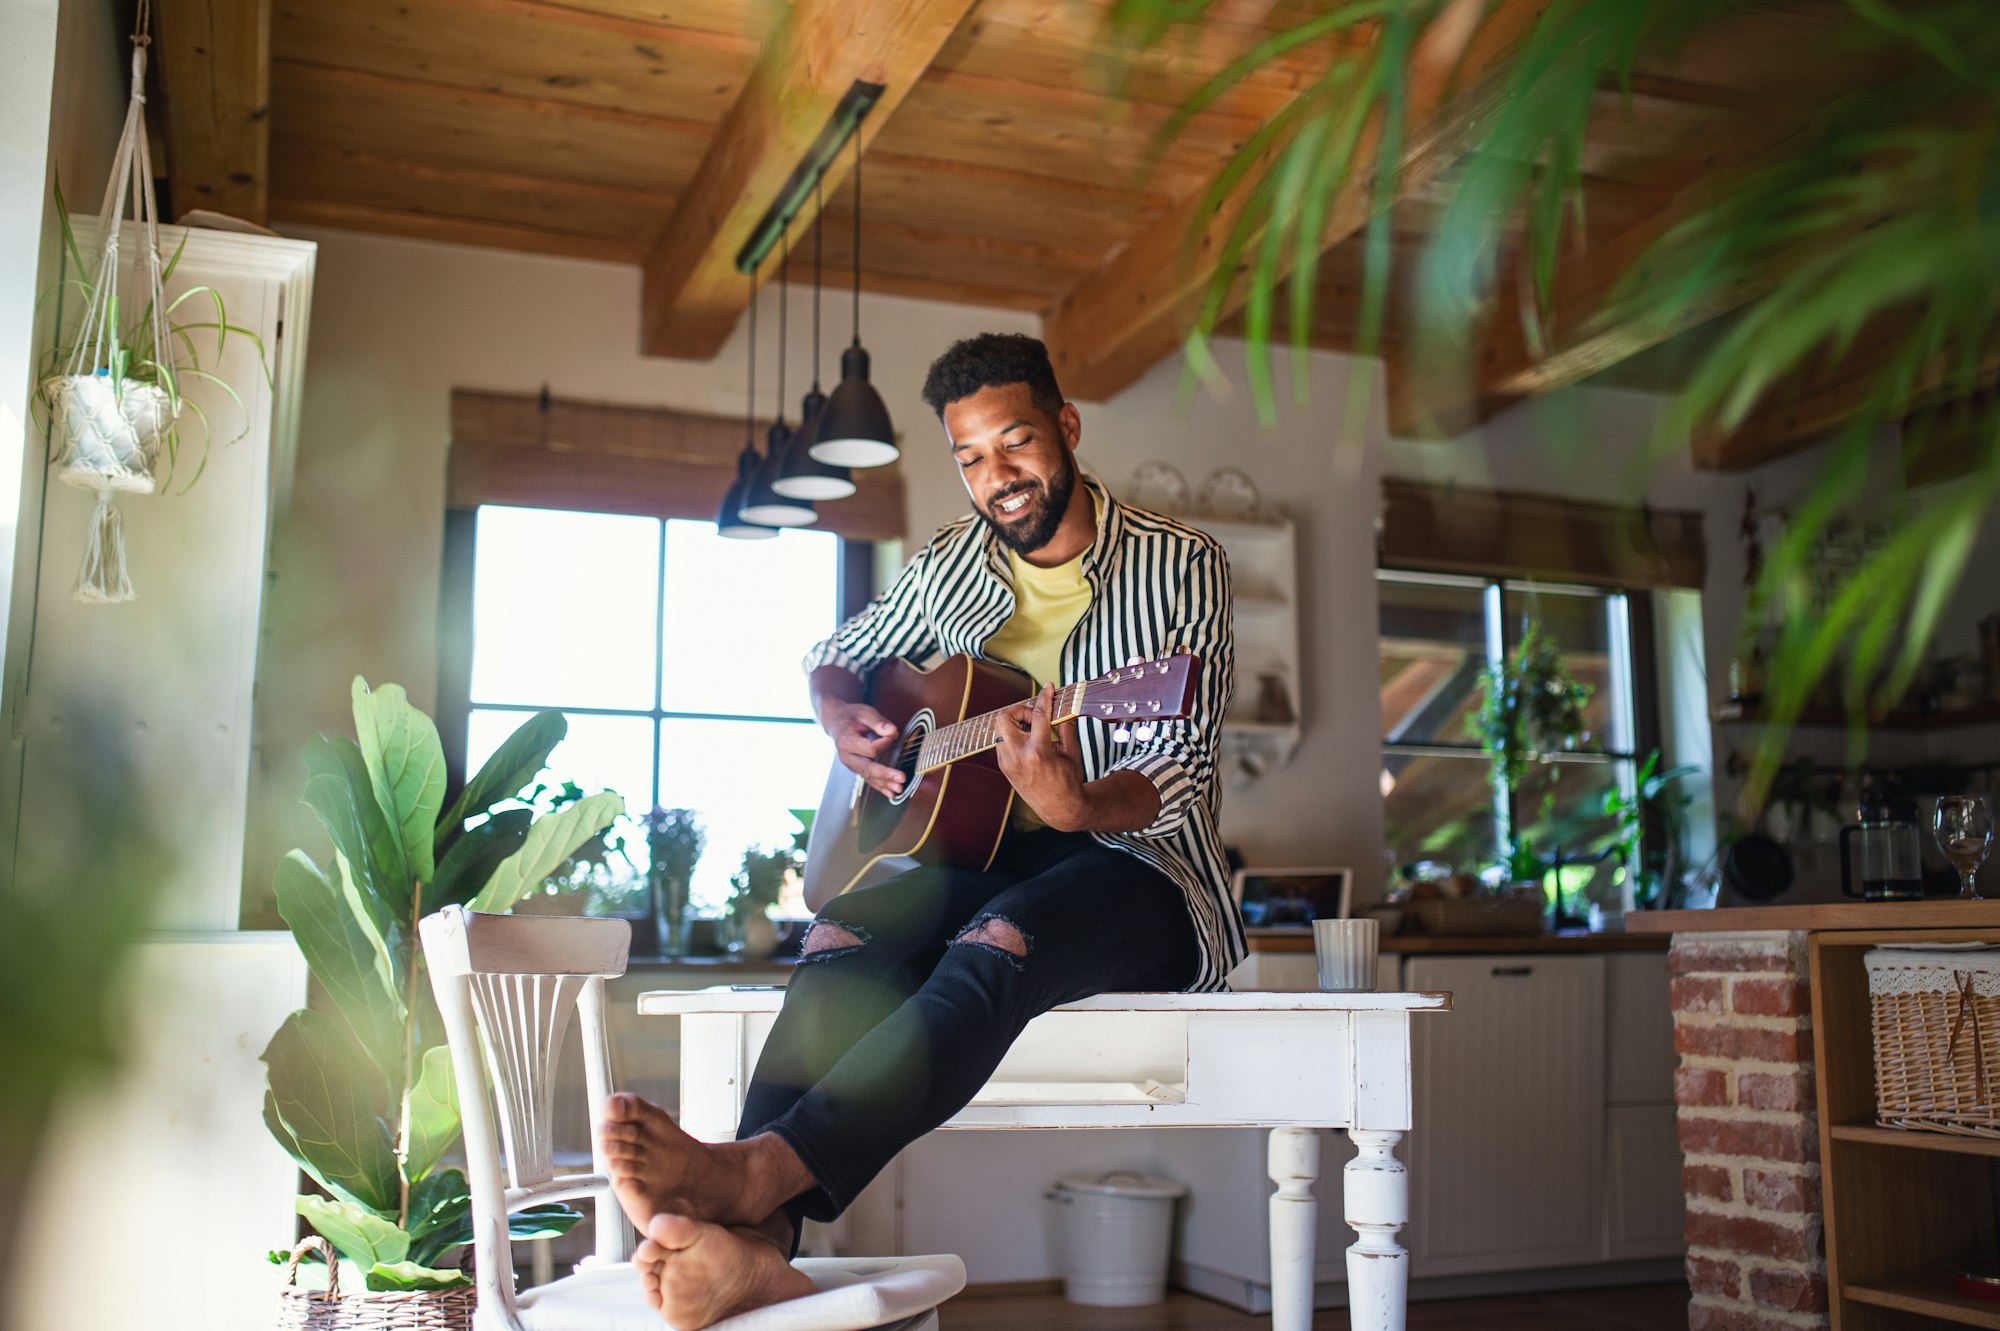 Happy young man with guitar indoors at home, relaxing